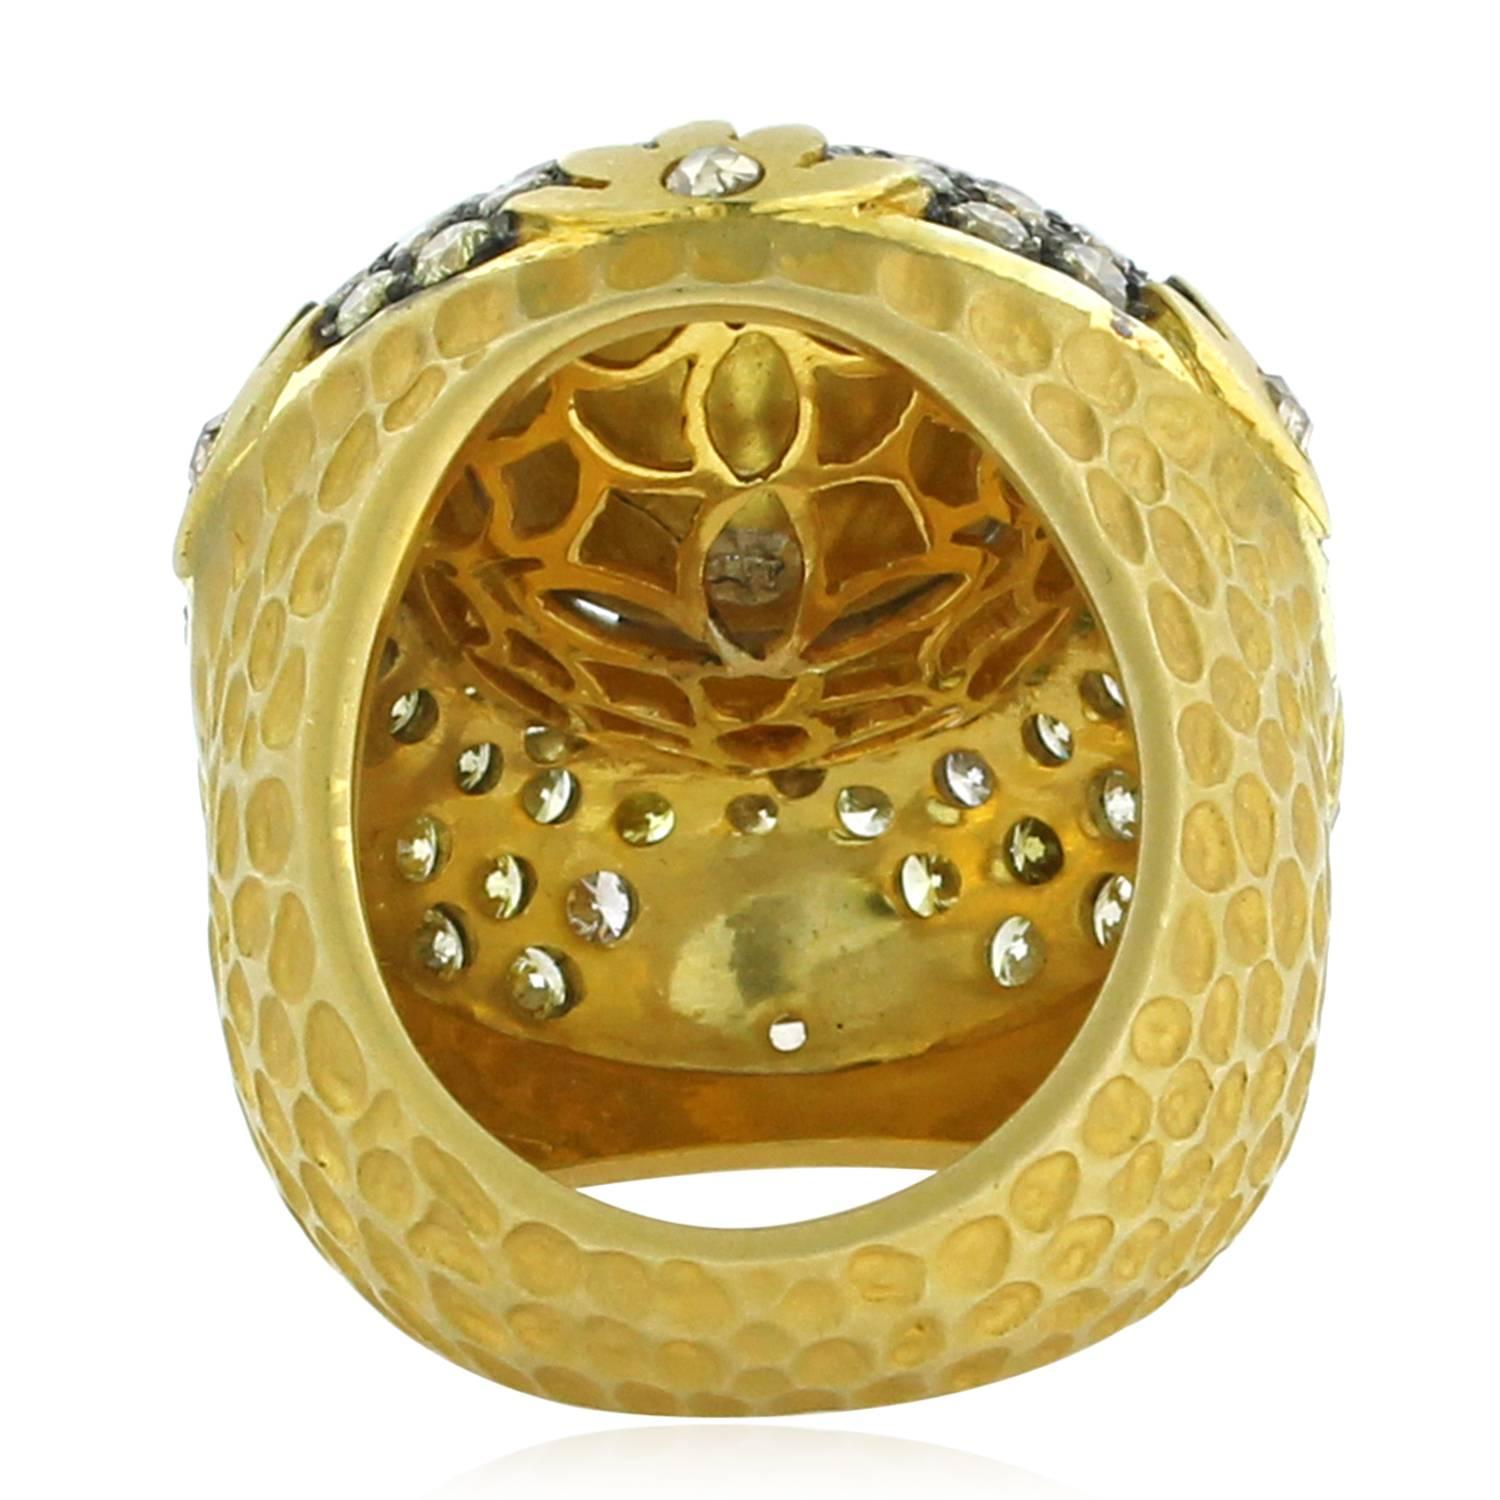 Bold and Royal Looking Rosecut Diamond Ring in 18K Yellow Gold. With floral design on the sides and bright yellow pave diamonds around the big rose cut diamond and texture on the shank this is a perfect cocktail ring. 

18k: 24.32gms
Diamond: